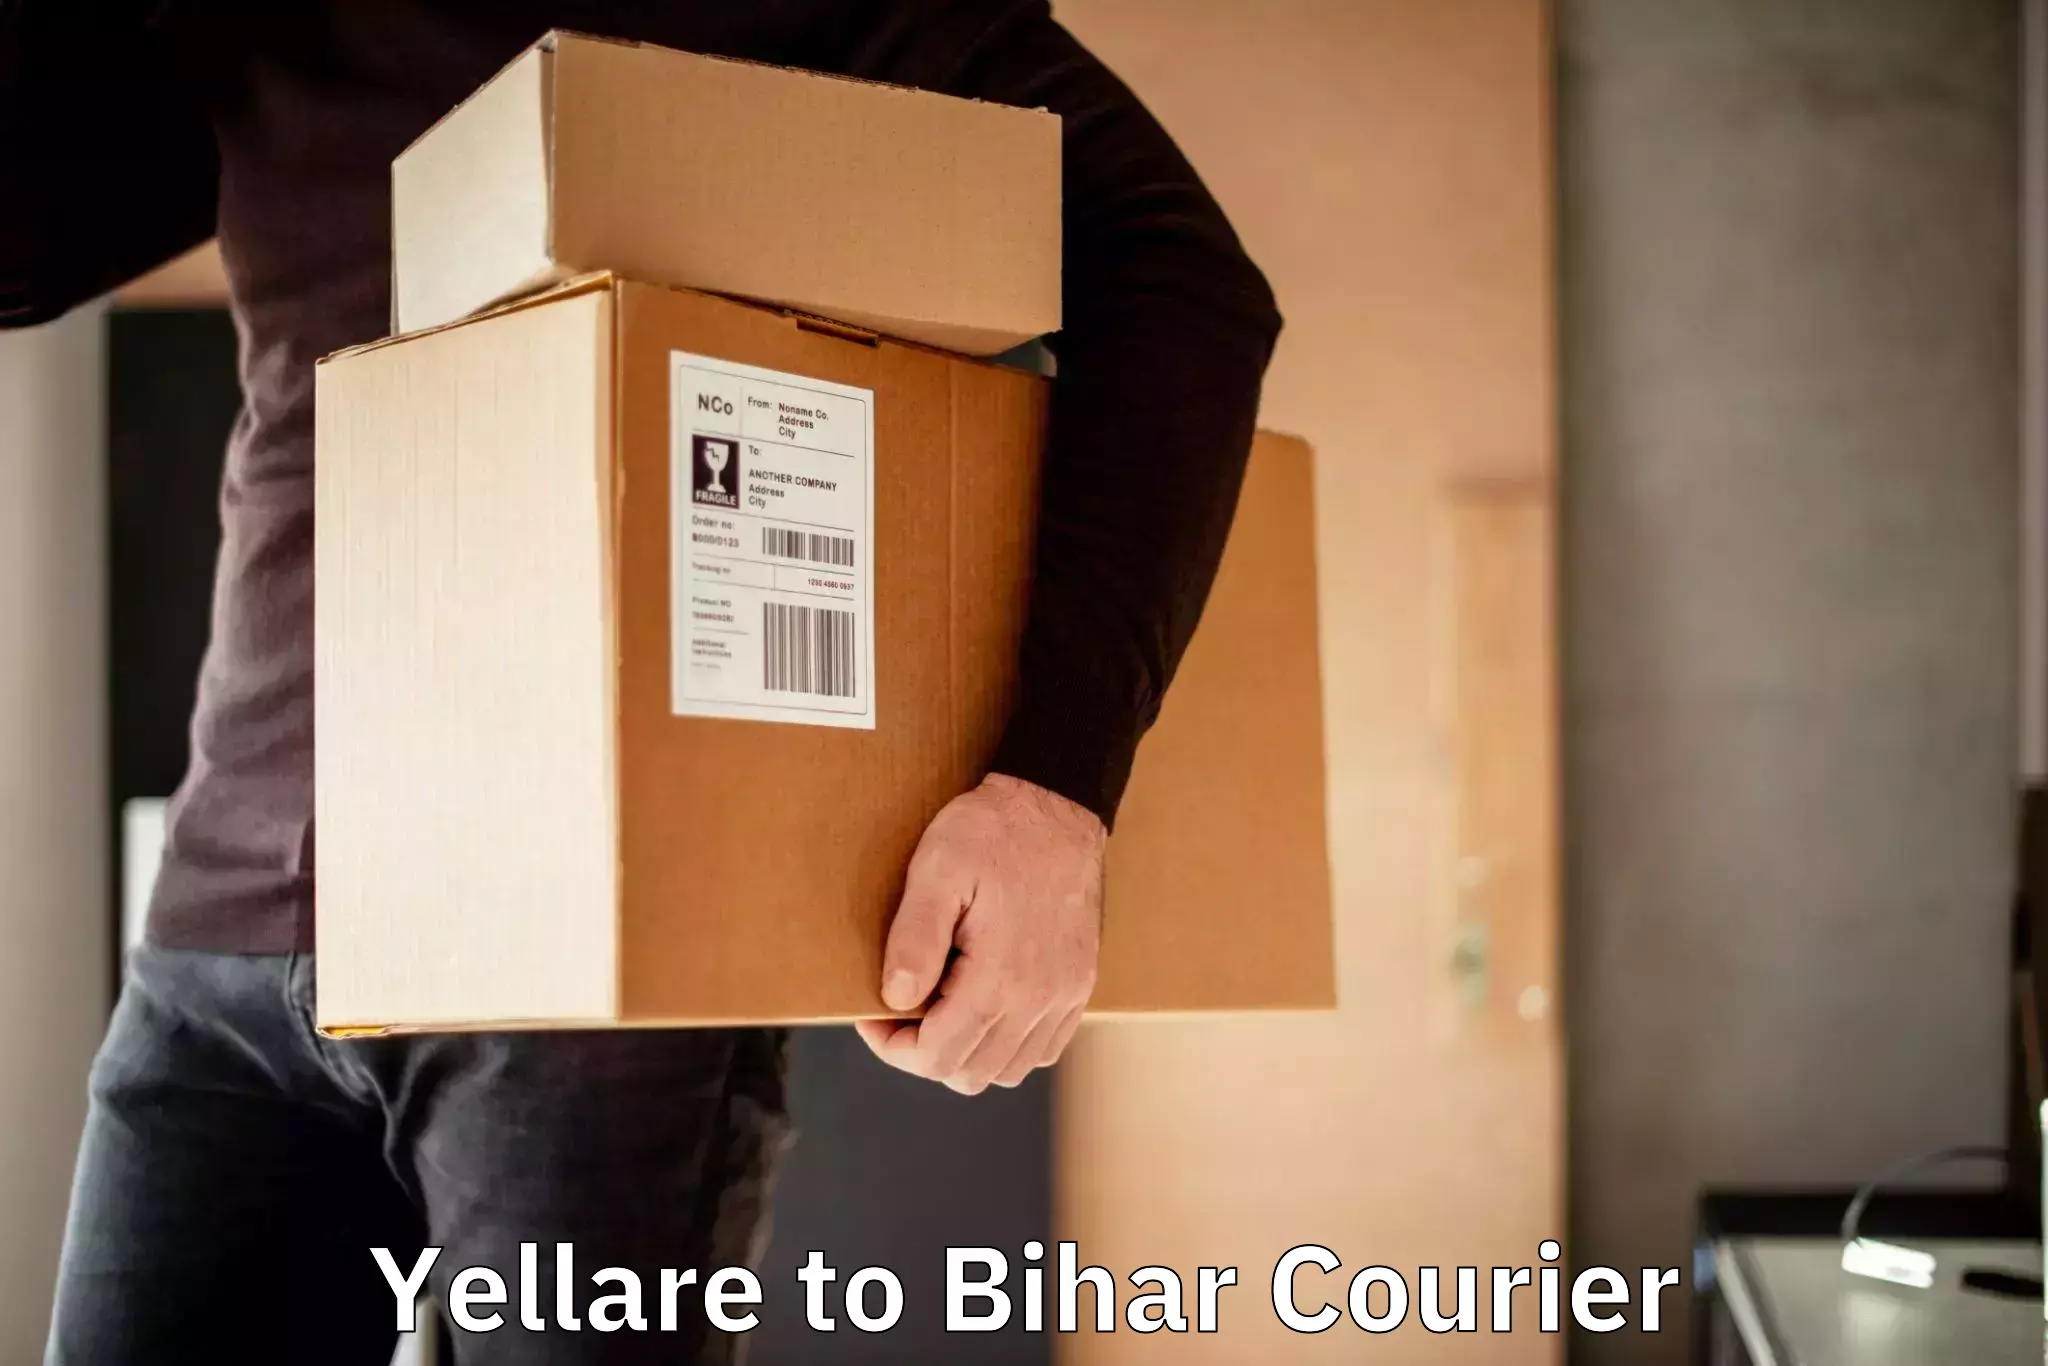 Courier rate comparison Yellare to Simrahi Bazar